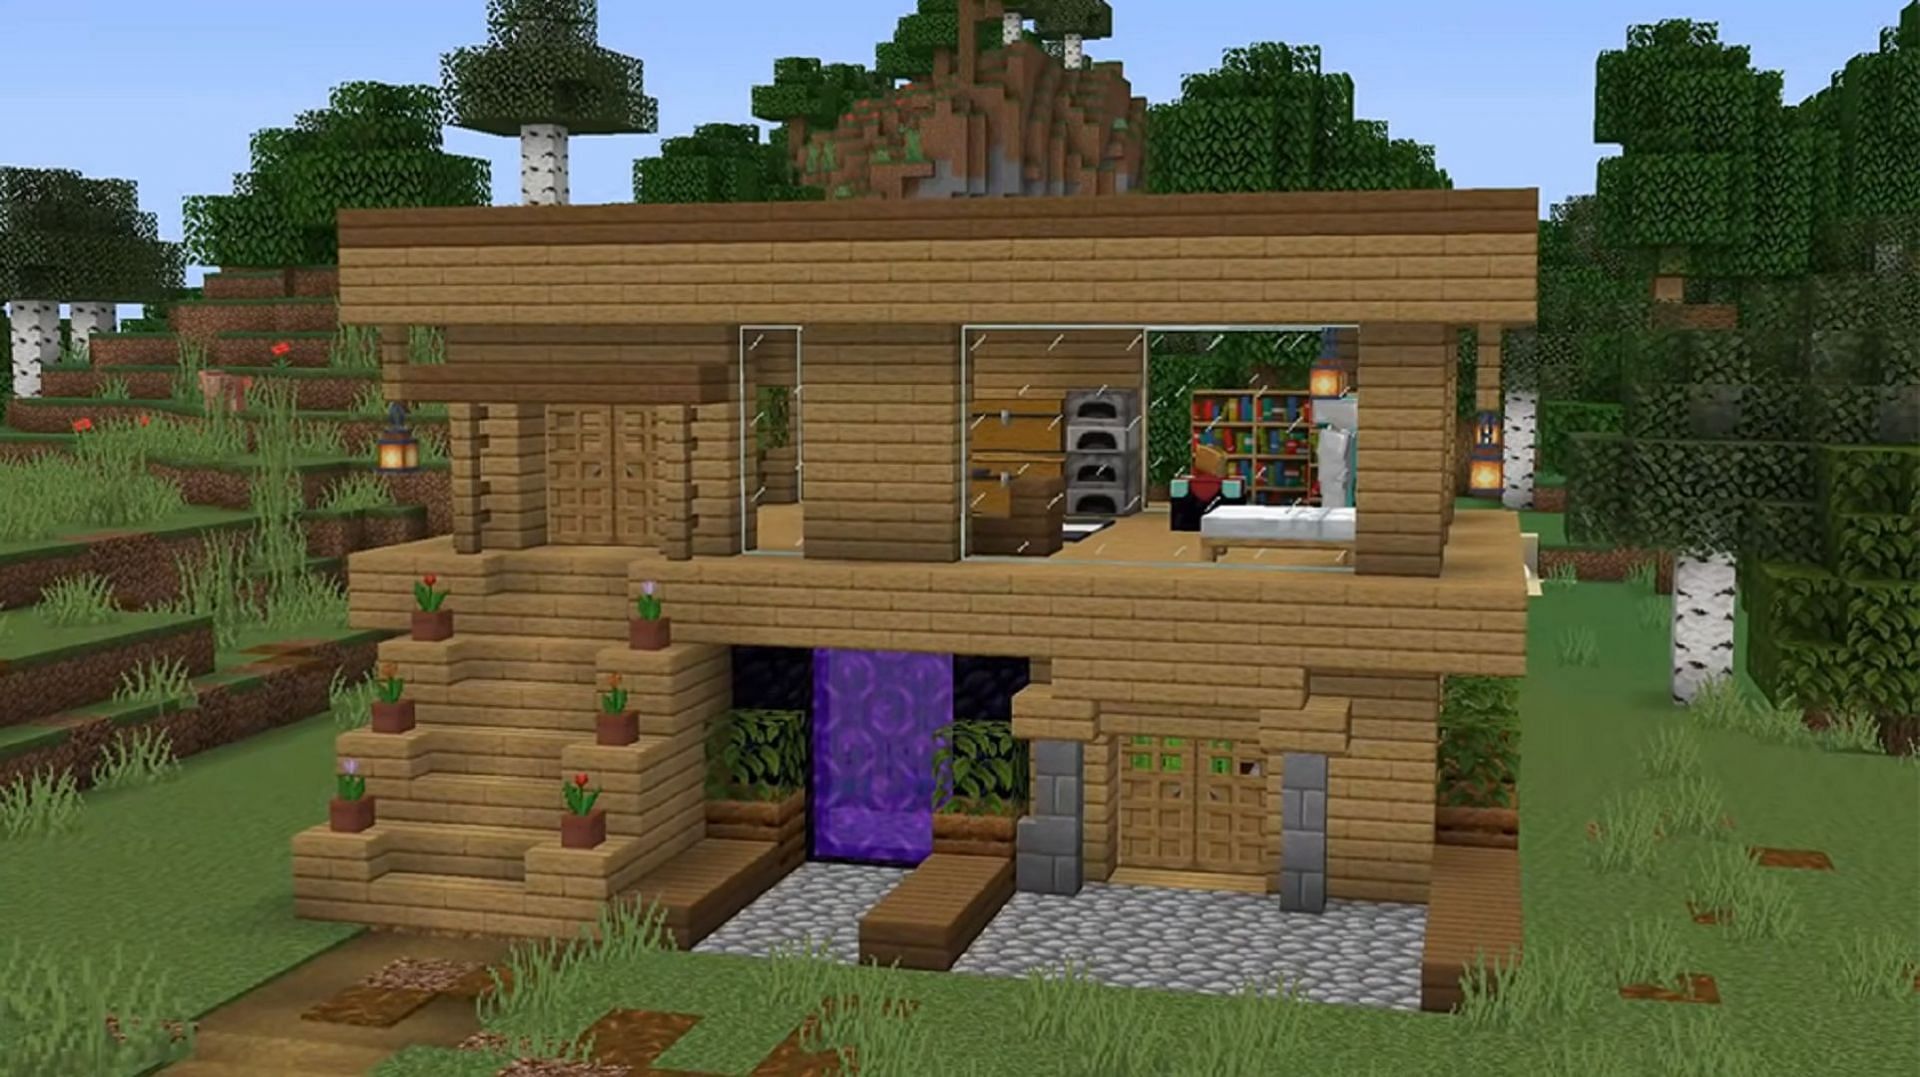 This house is built of simple materials and facilitates all feasible needs for players (Image via HeyImRobby/YouTube)